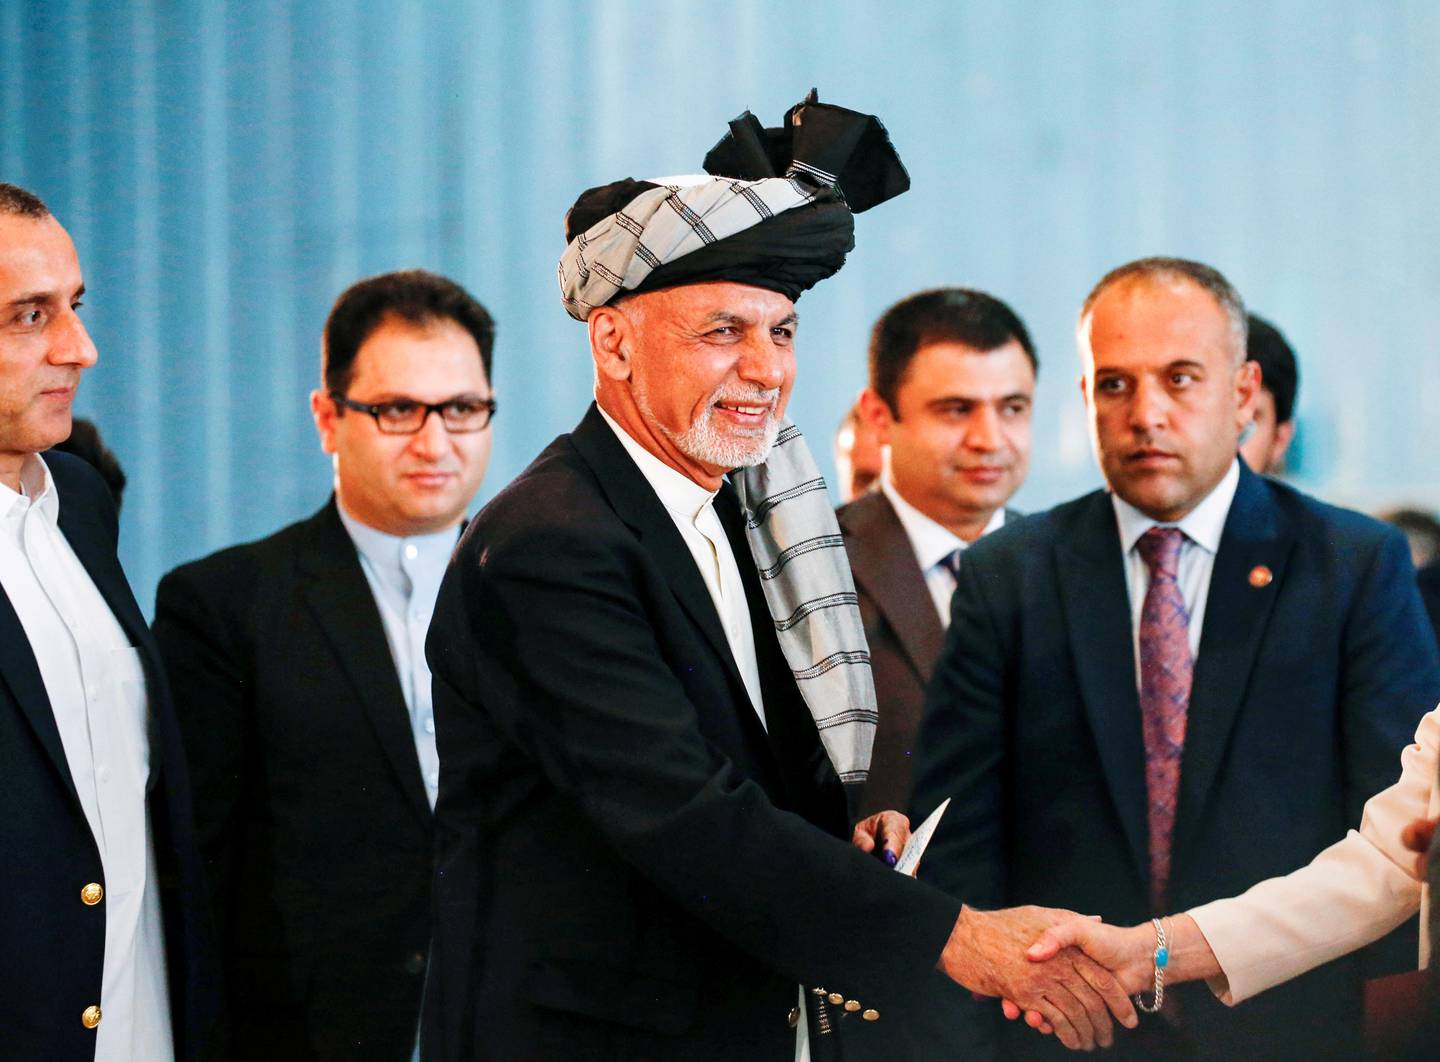 Afghan presidential candidate Ashraf Ghani arrives to cast his vote in the presidential election in Kabul, Afghanistan September 28, 2019. REUTERS/Mohammad Ismail     TPX IMAGES OF THE DAY